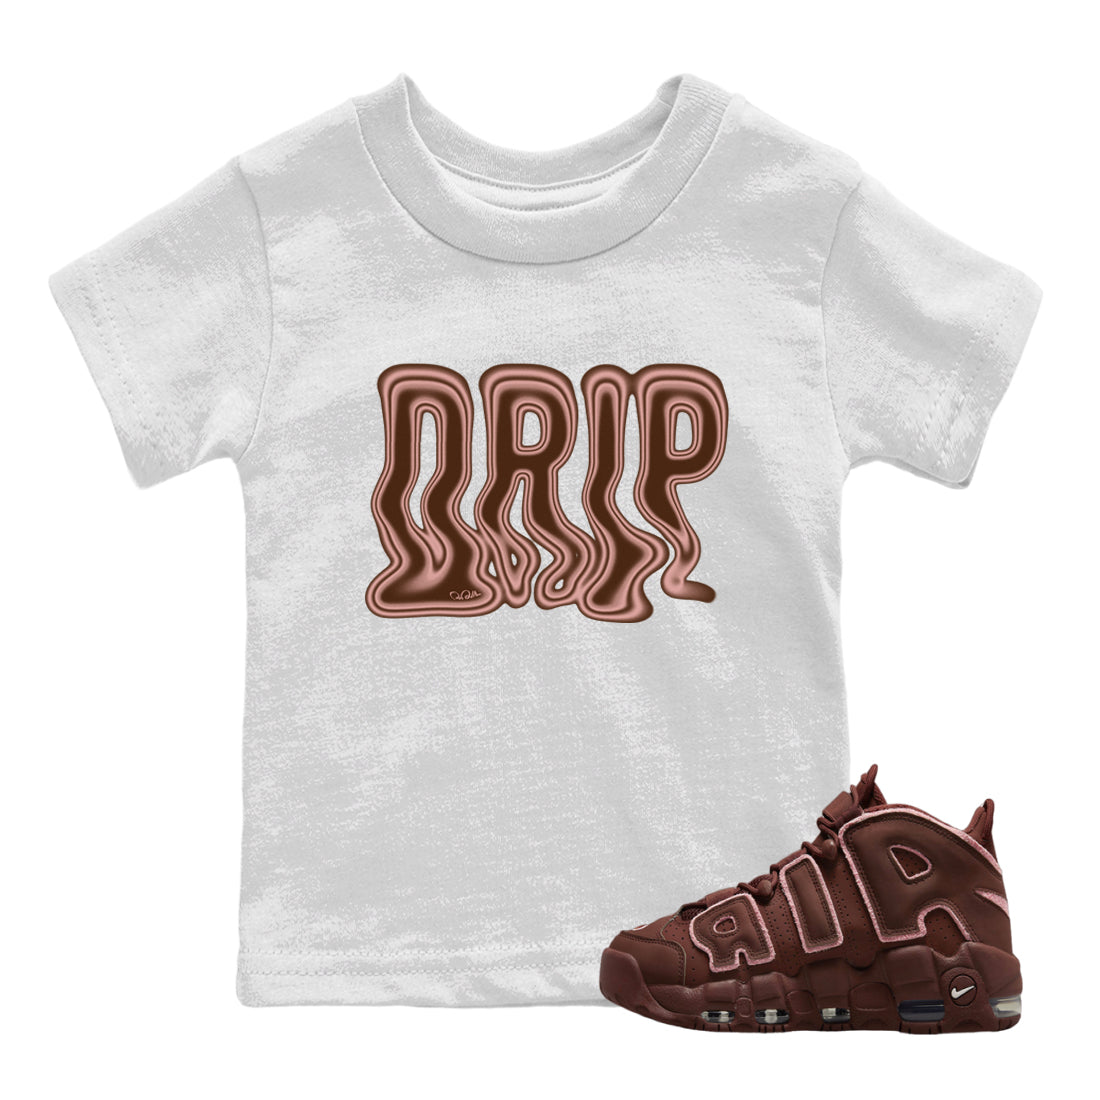 Air More Uptempo Valentines Day Sneaker Tees Drip Gear Zone Drip Sneaker Tees Nike Uptempo Valentines Day Shirt Kids Shirts White 1